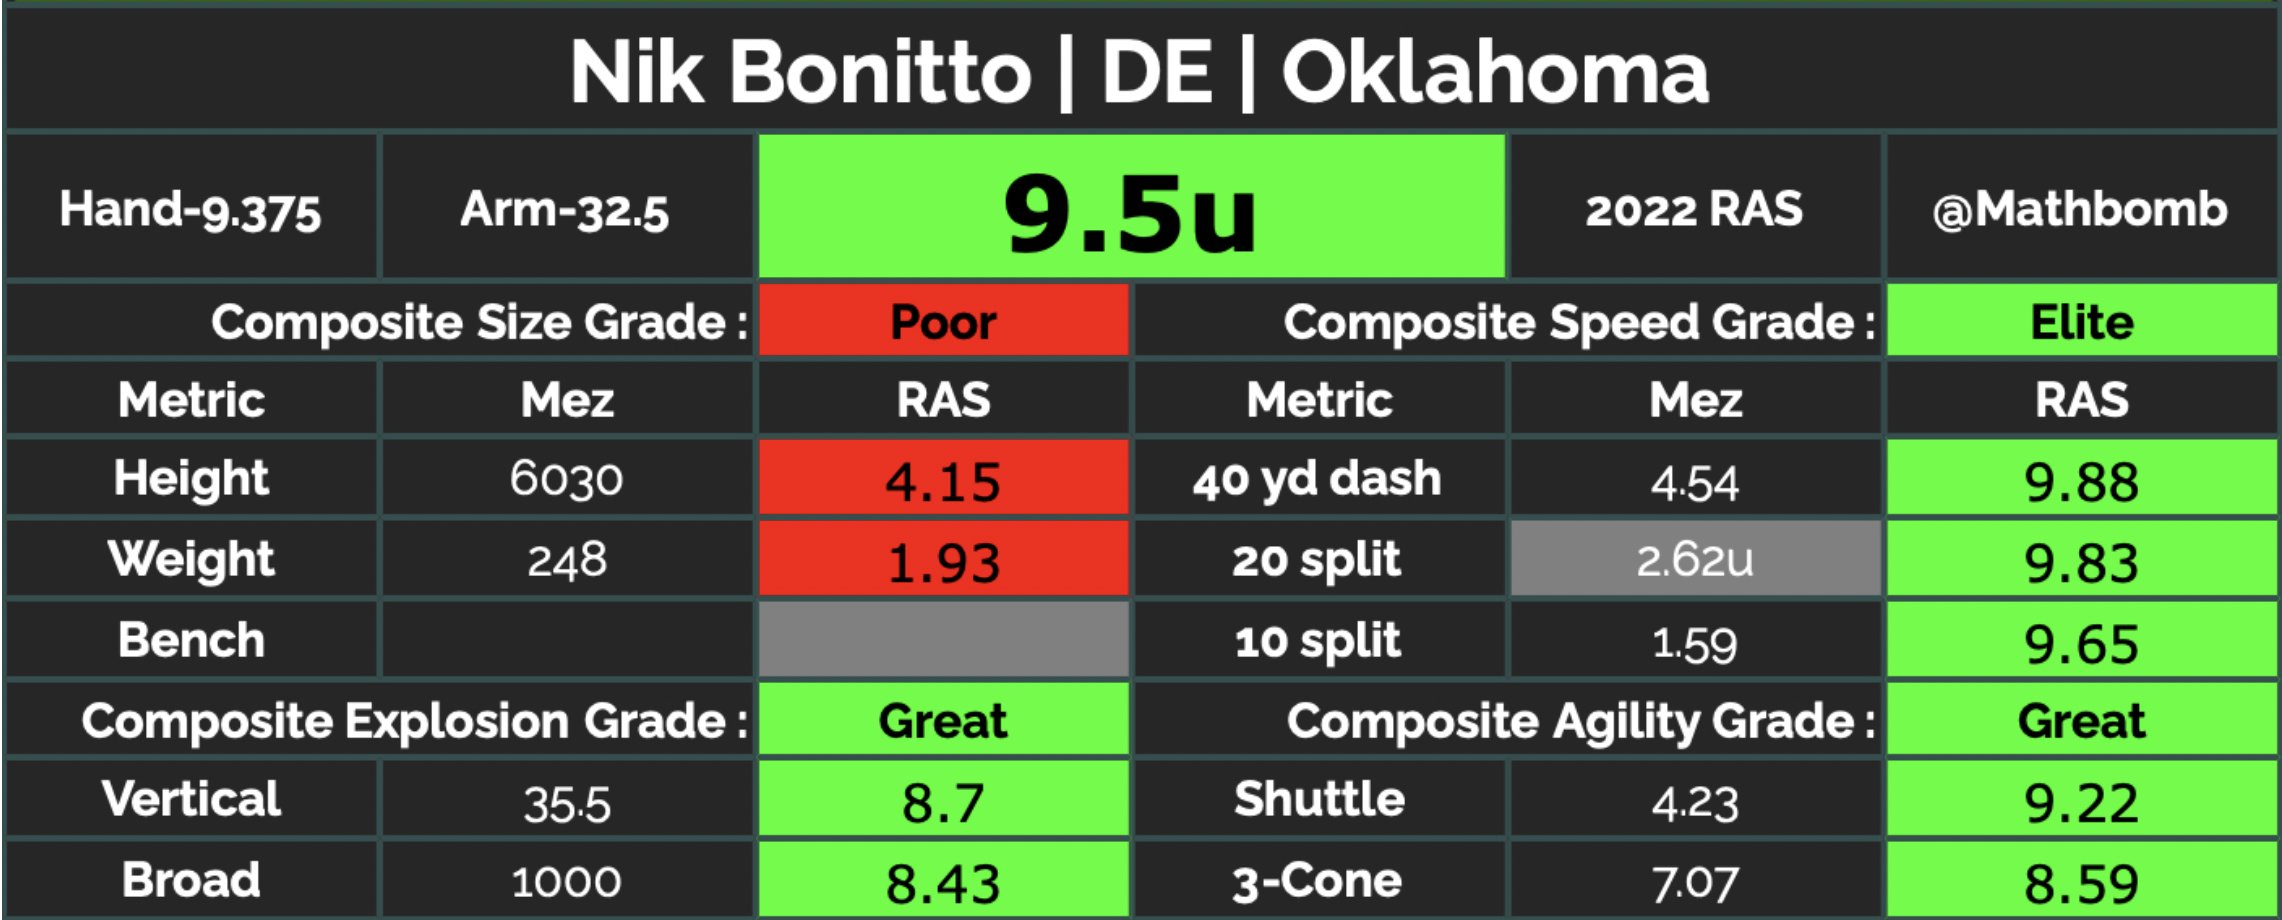 Reneau on Twitter: "Nik Bonitto added 10 pounds after the season, as he should have, and hits an official 4.54 40-yard dash. Stop overthinking it." / Twitter